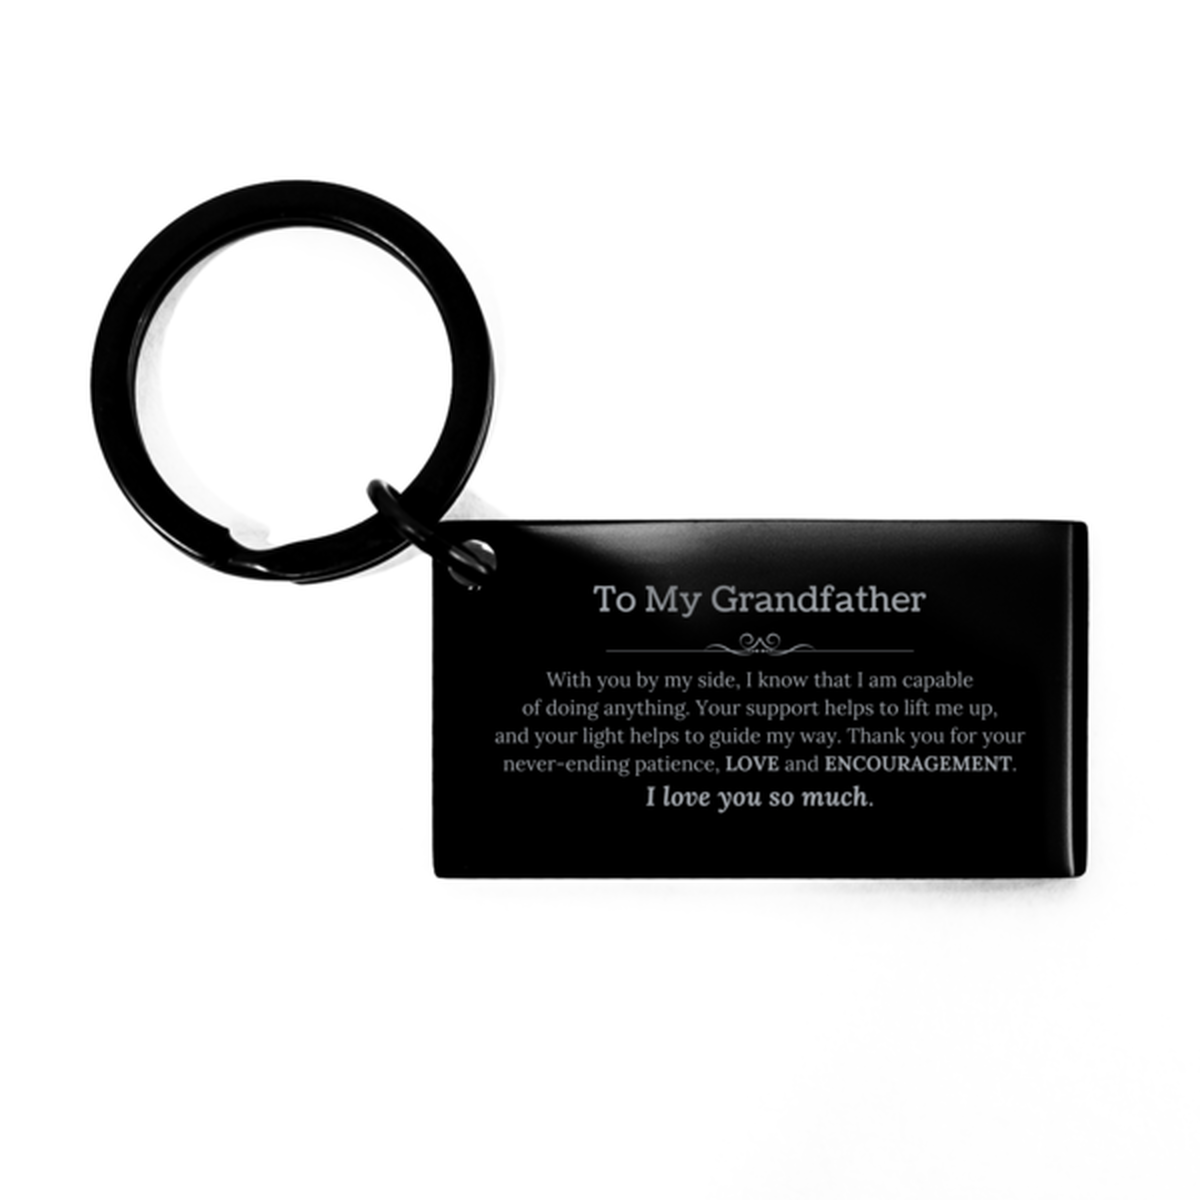 Appreciation Grandfather Keychain Gifts, To My Grandfather Birthday Christmas Wedding Keepsake Gifts for Grandfather With you by my side, I know that I am capable of doing anything. I love you so much